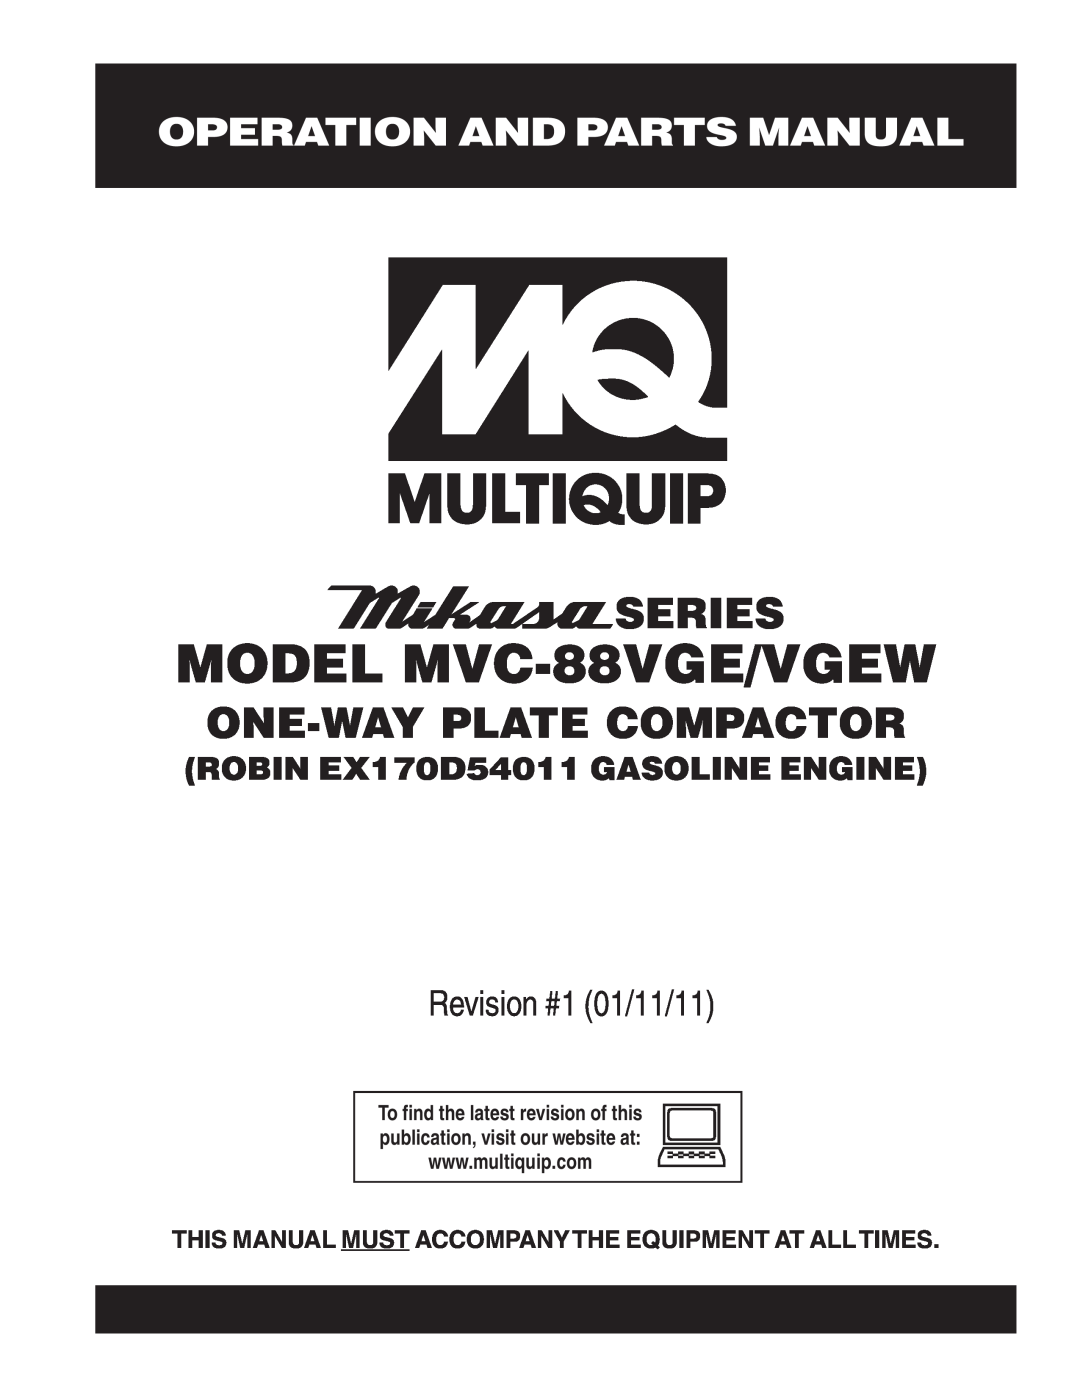 Multiquip manual MODEL MVC-88VGE/VGEW, Series, One-Way Plate Compactor, Operation And Parts Manual 